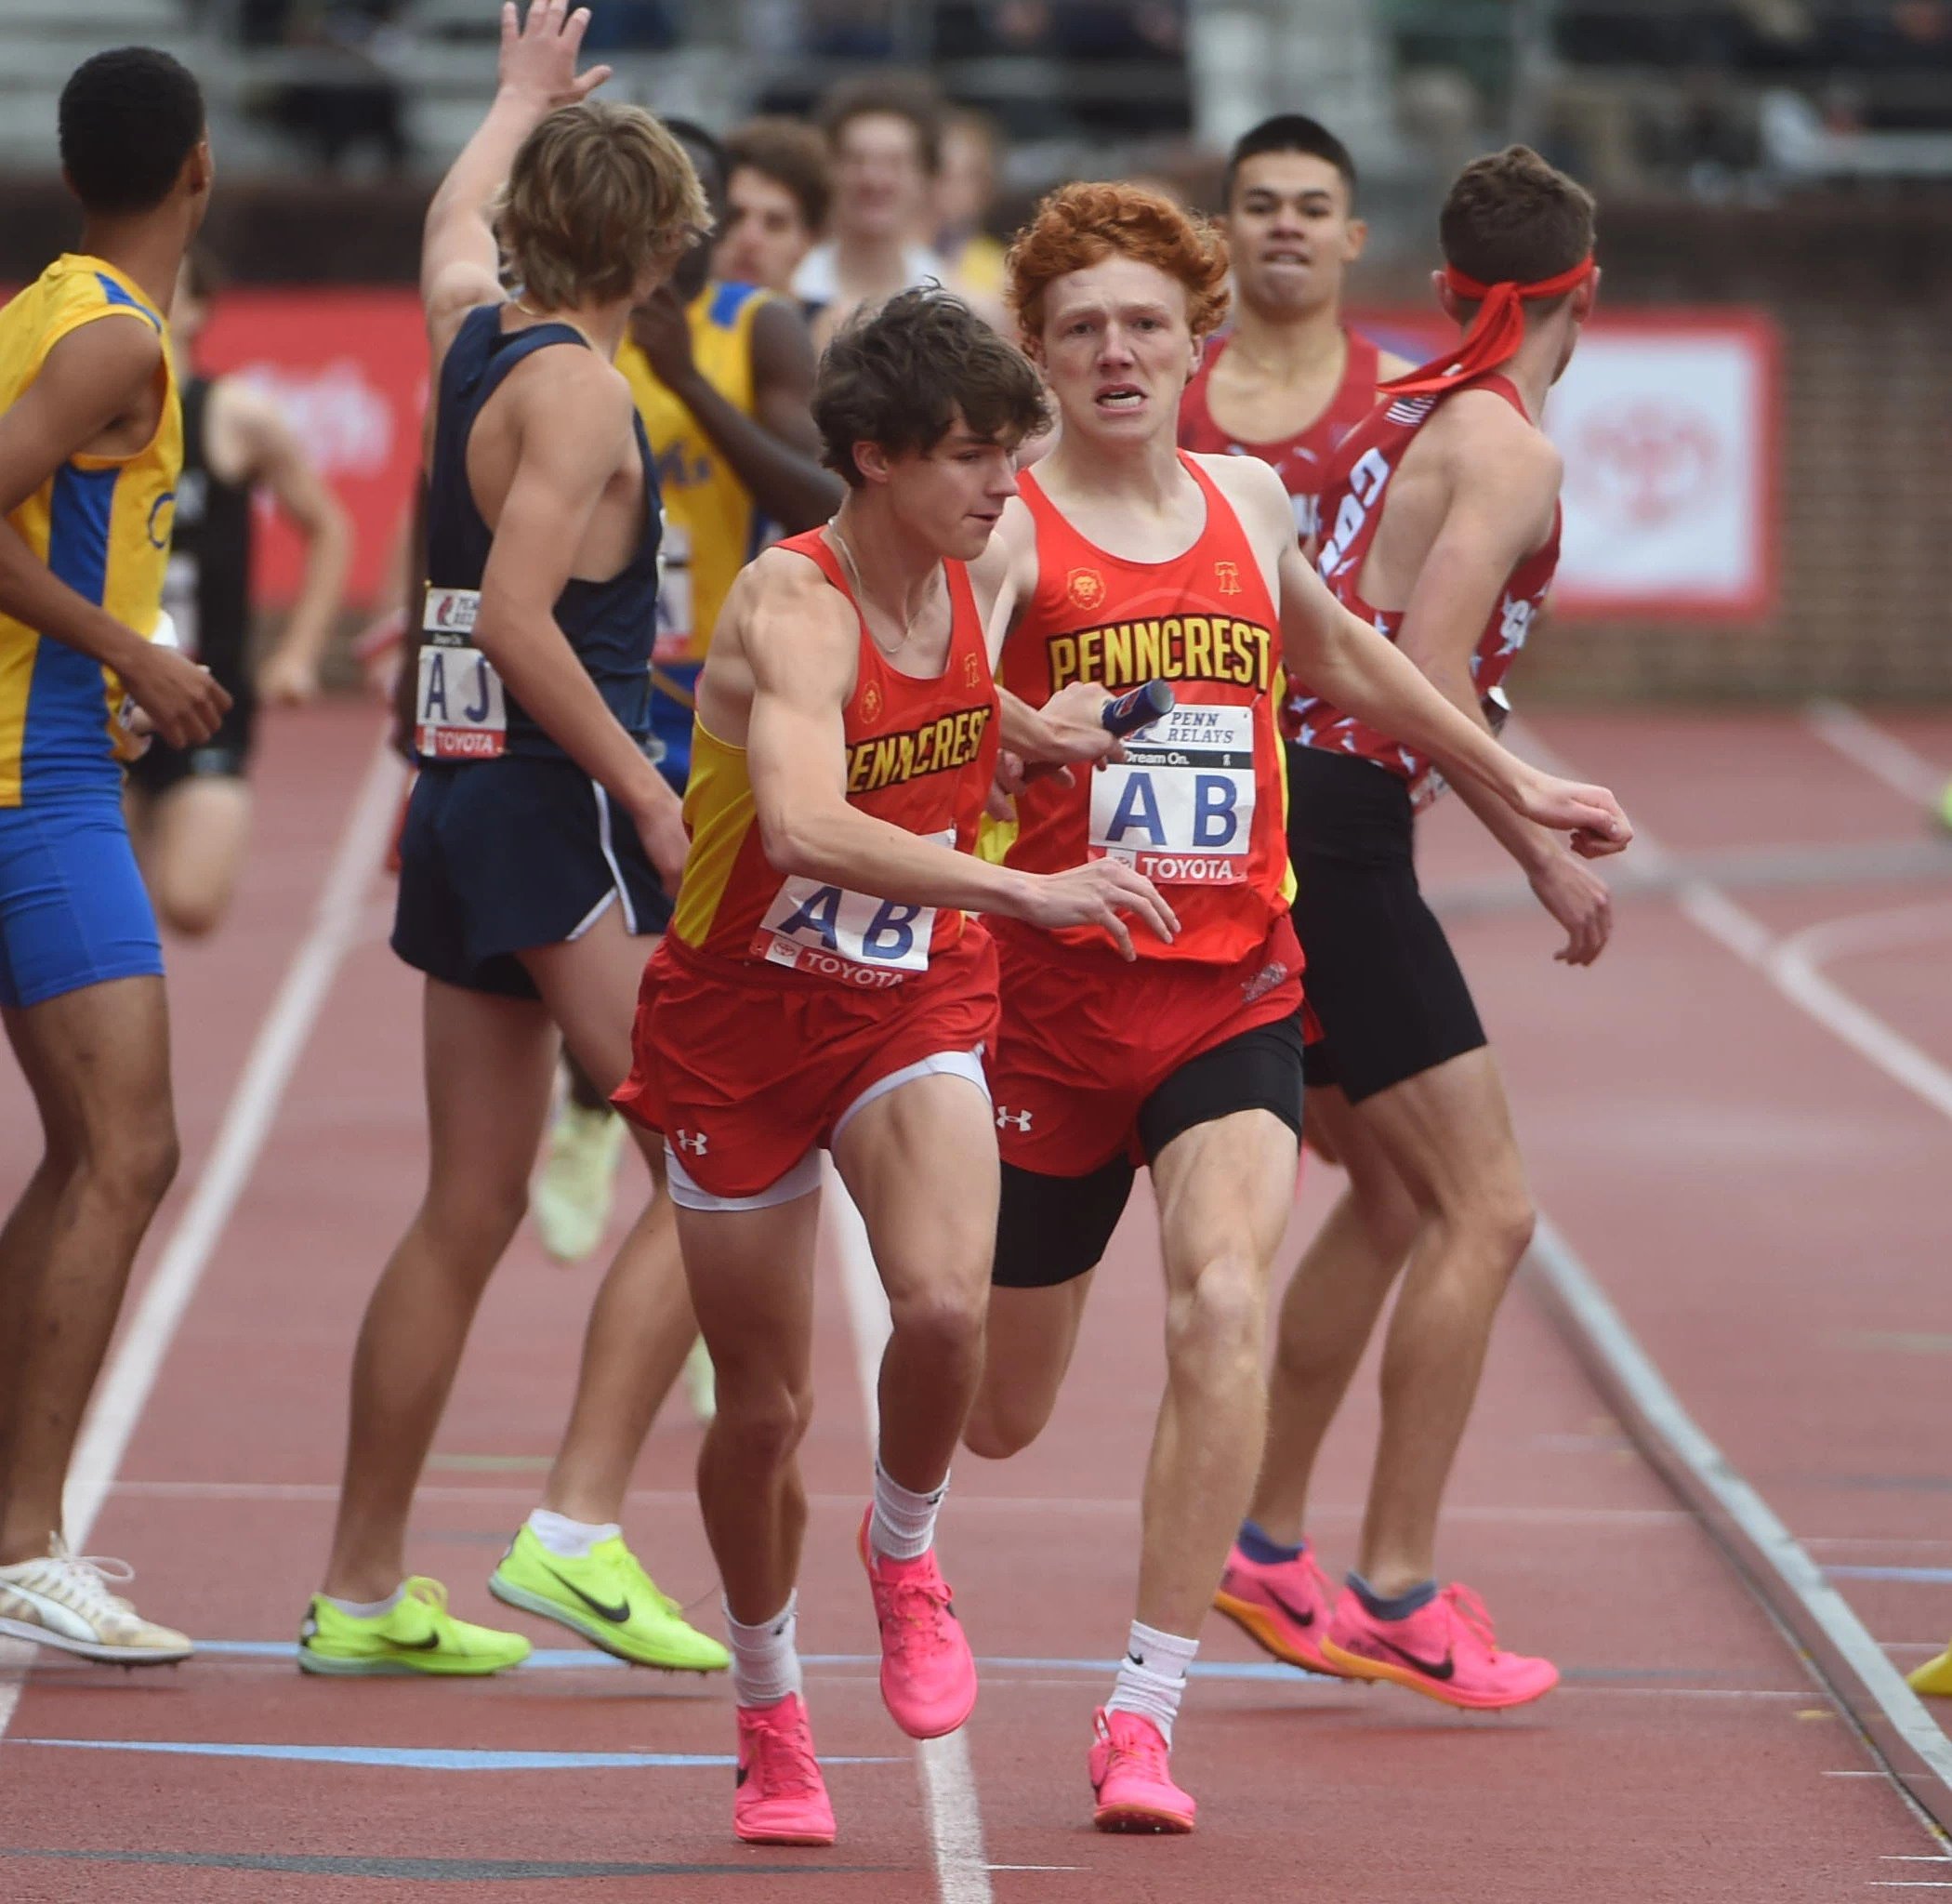 Penn Relays Penncrest gets its wish, advances in 3,200meter relay